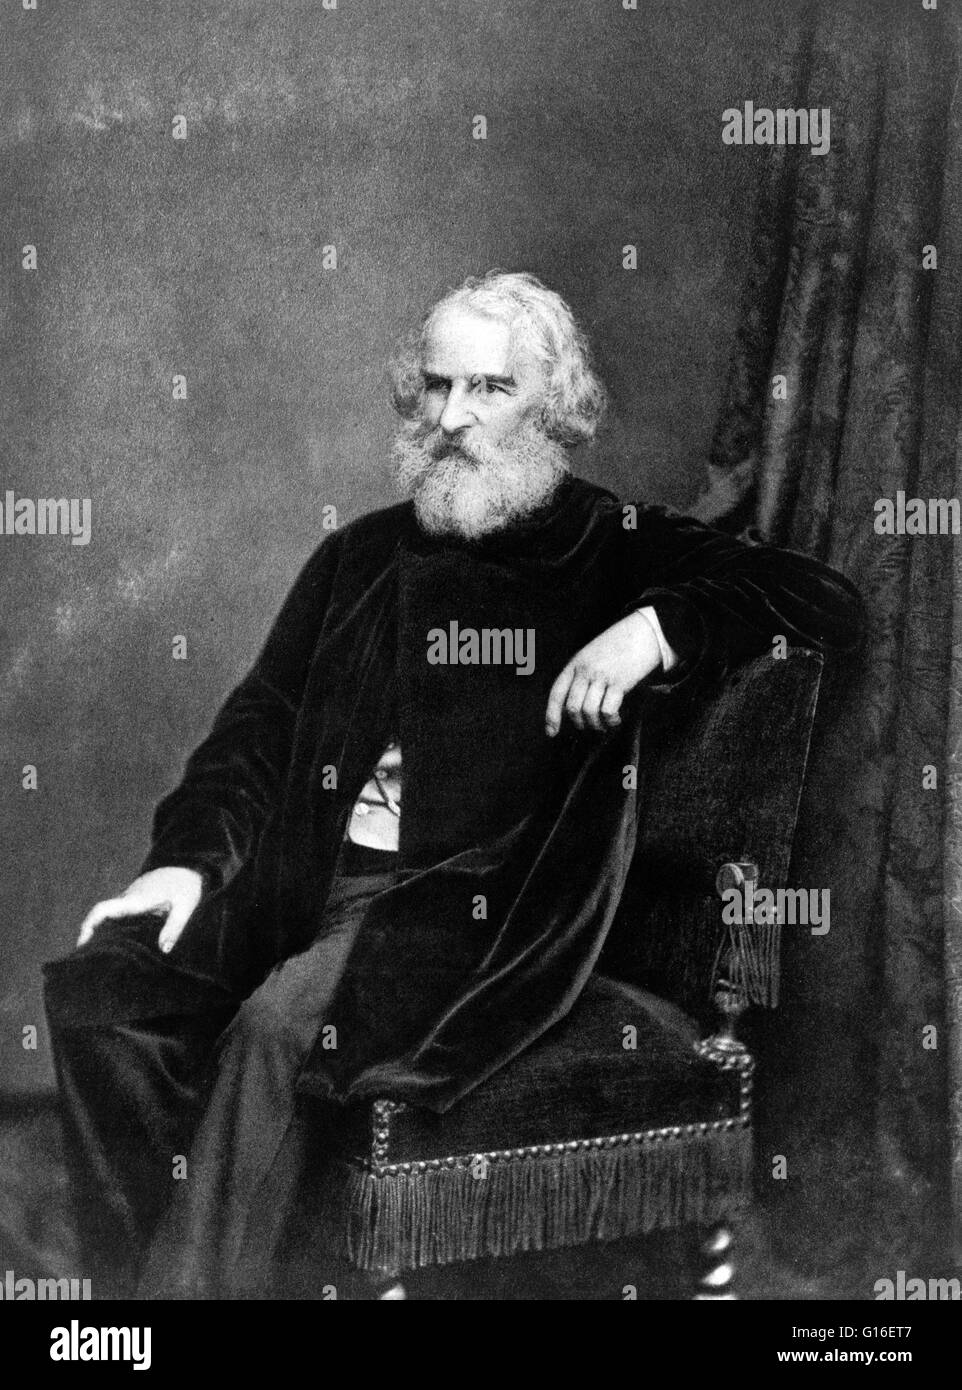 Henry Wadsworth Longfellow (February 27, 1807 - March 24, 1882) was an American poet and educator. He wrote many lyric poems known for their musicality and often presenting stories of mythology and legend. He became the most popular American poet of his d Stock Photo